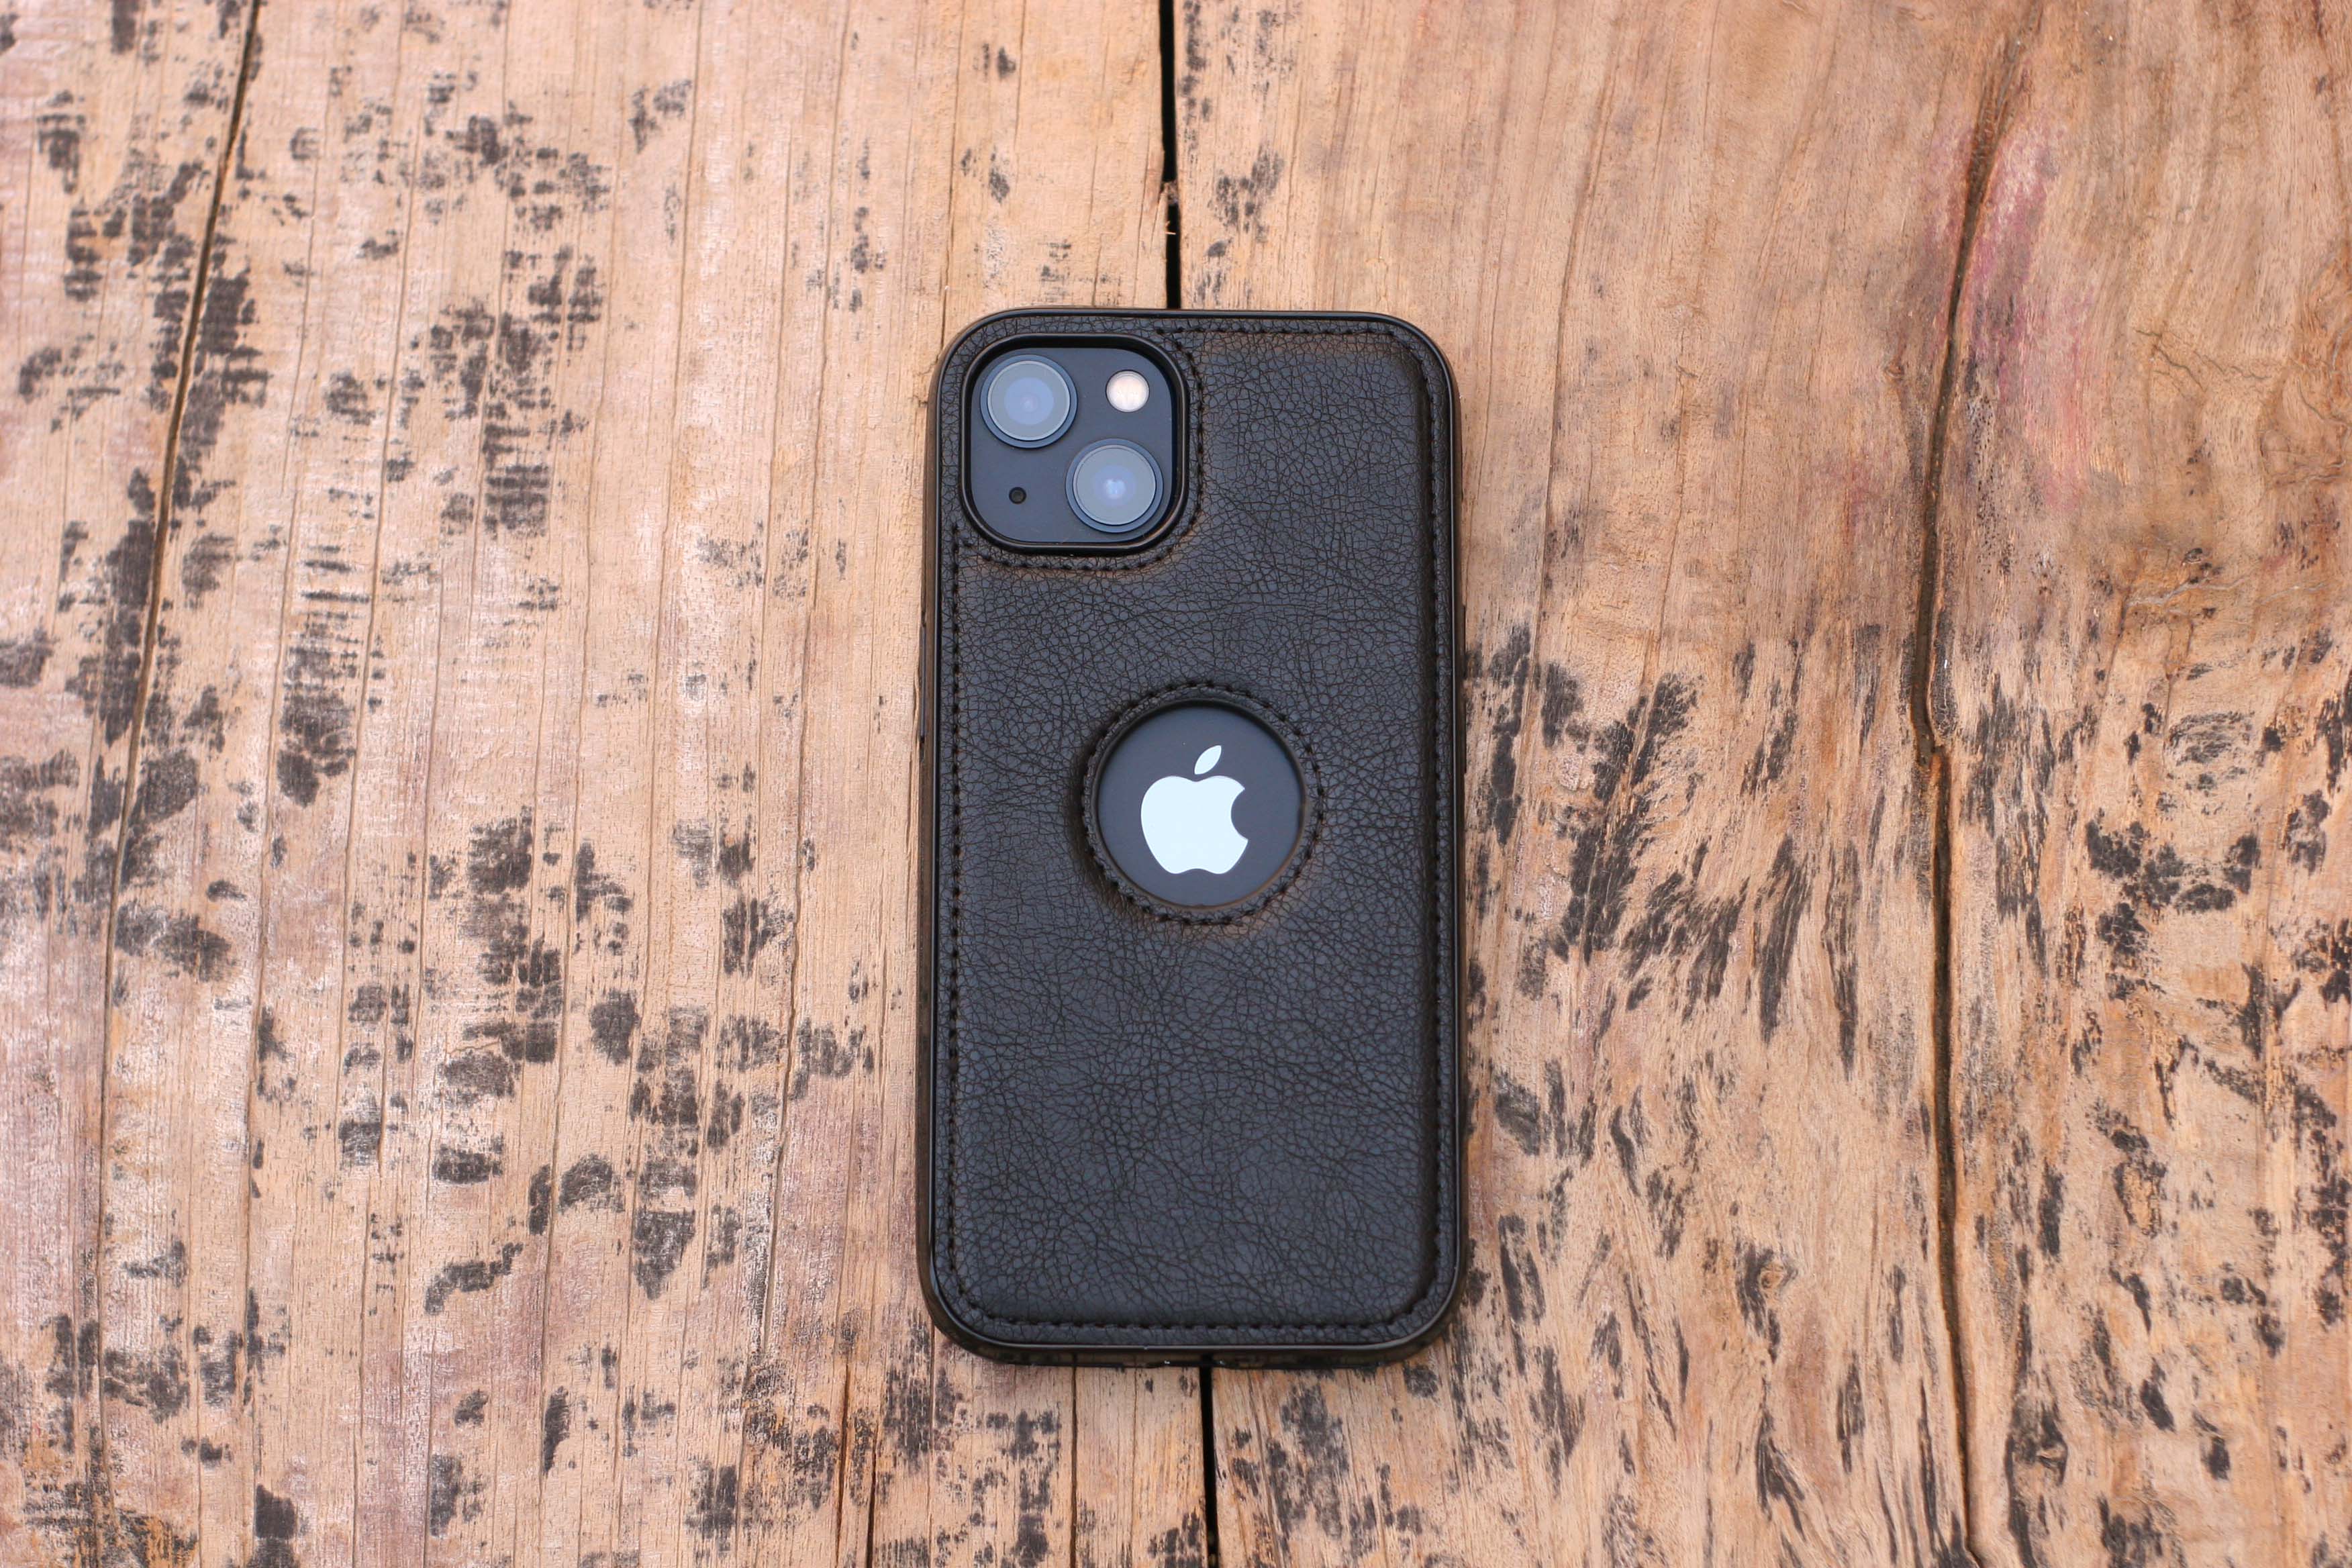 BLACK LEATHER PHONE CASE WITH APPLE LOGO